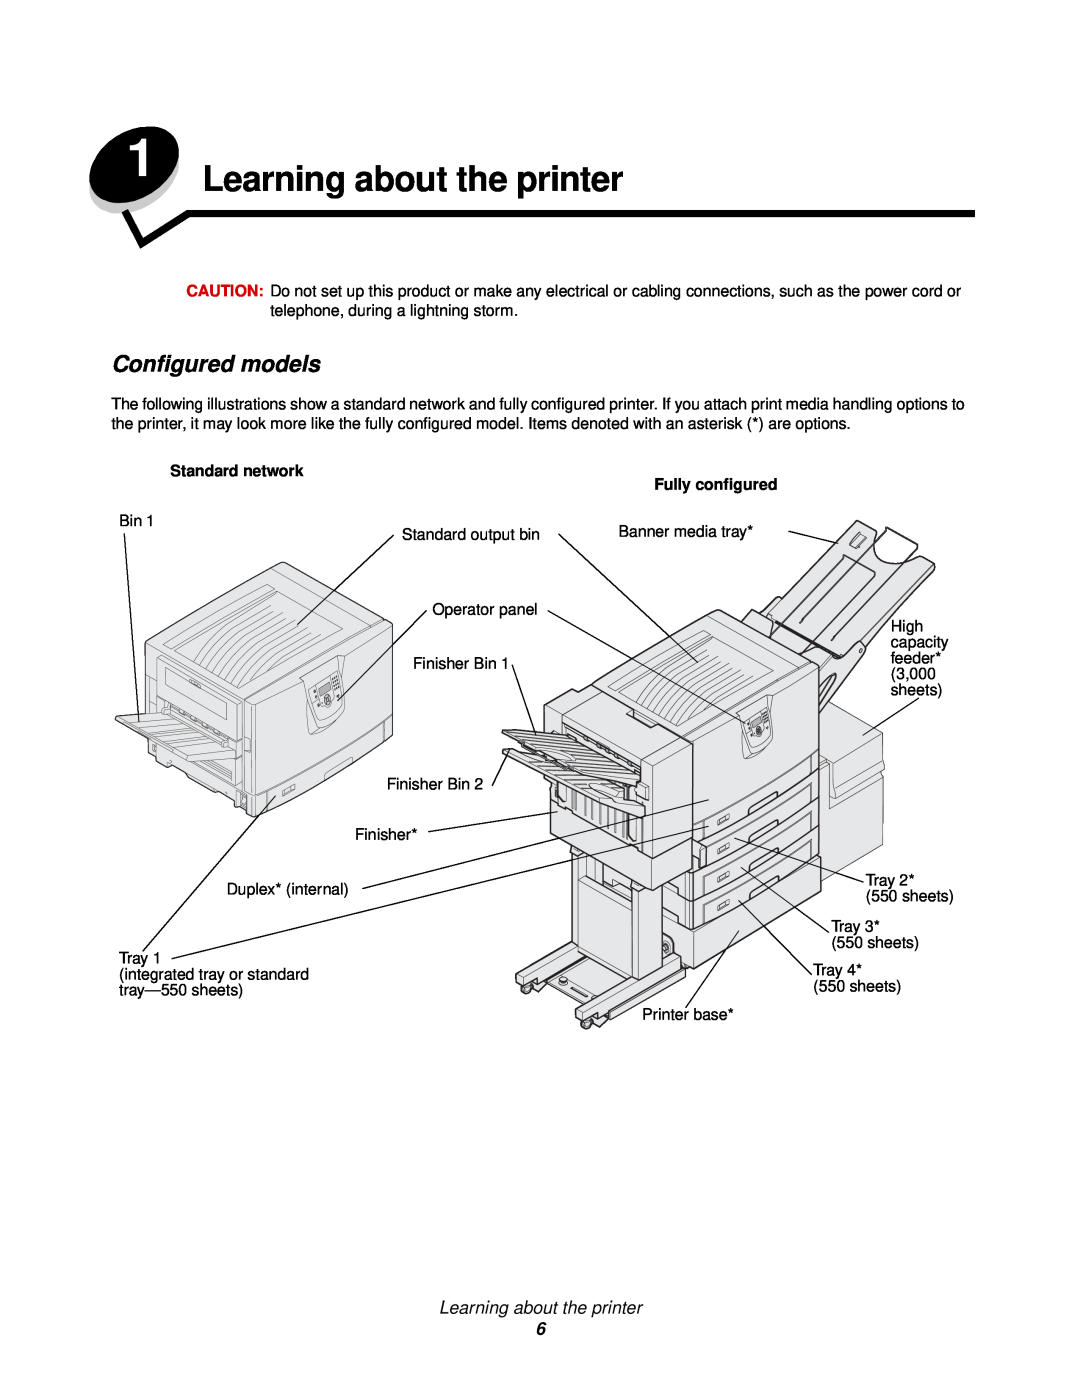 Lexmark 920 manual Learning about the printer, Configured models, Standard network, Fully configured 